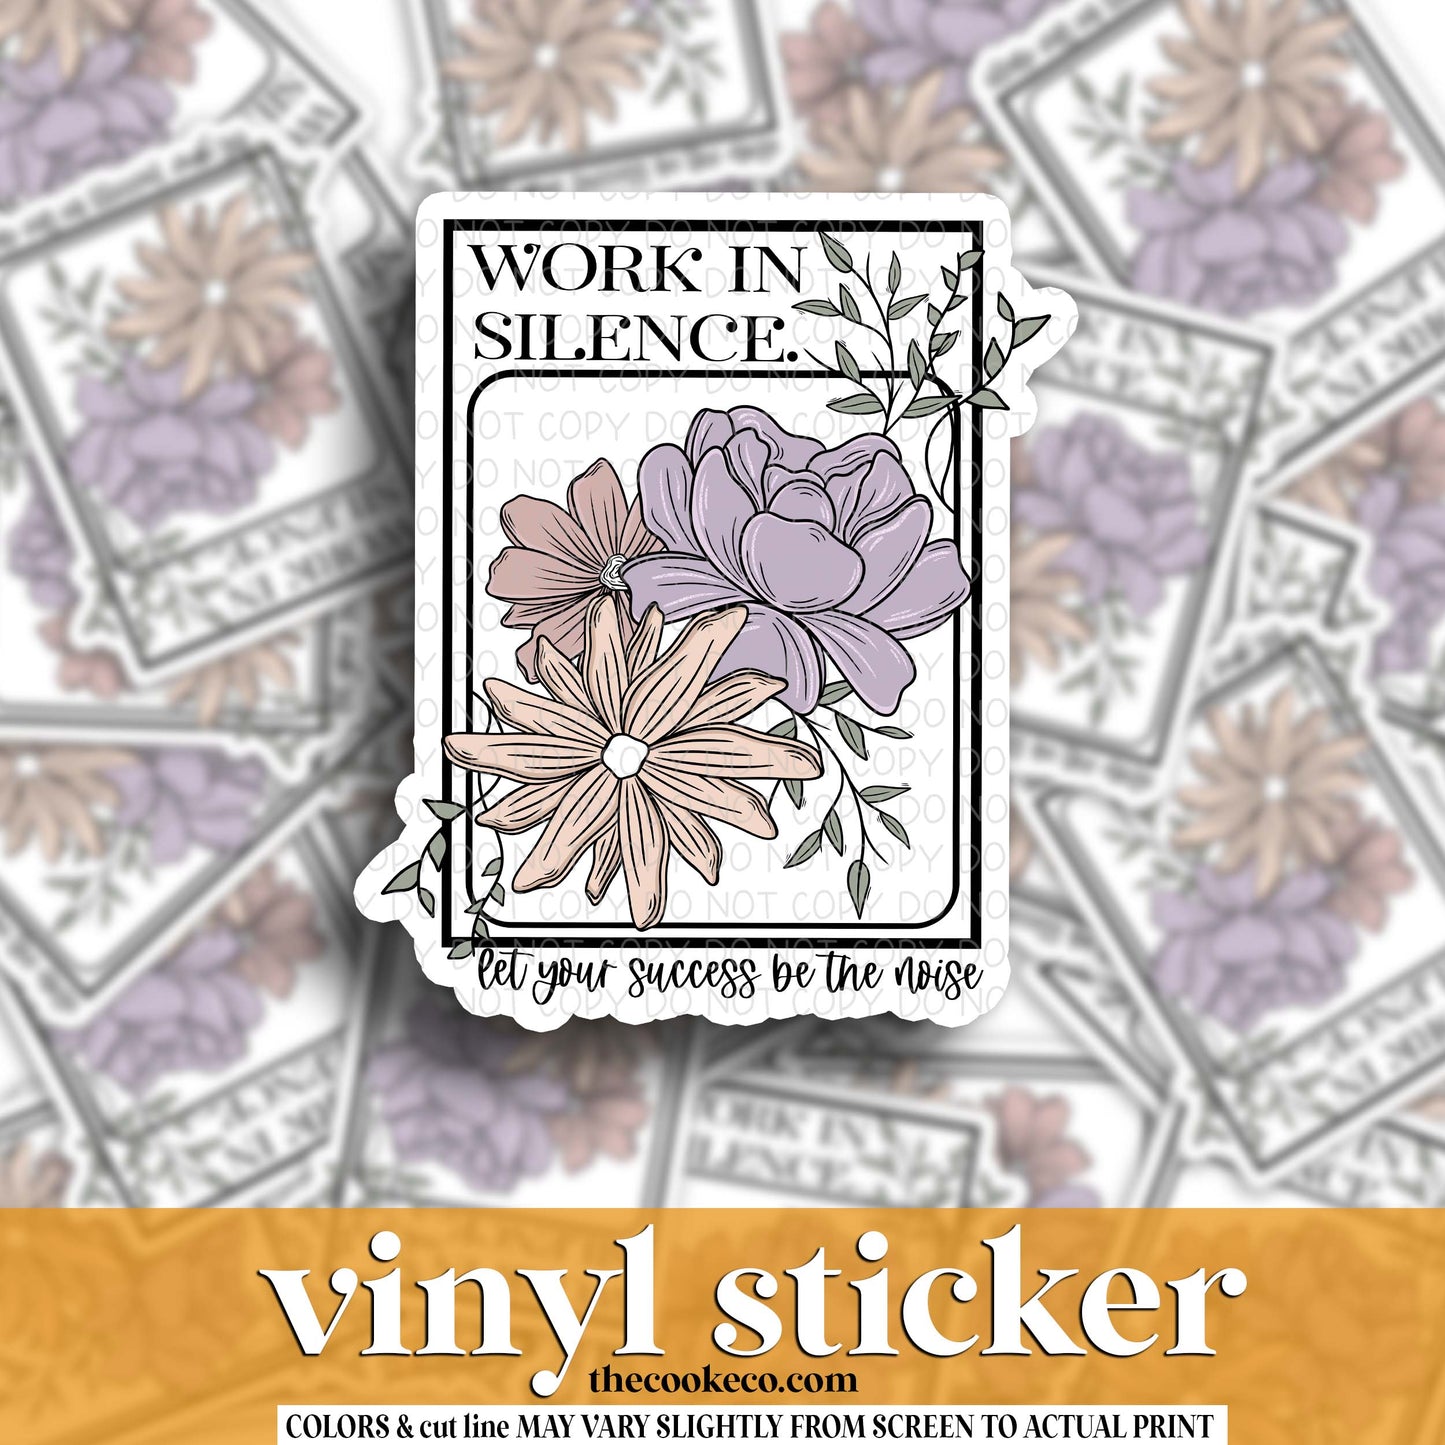 Vinyl Sticker | #V1718 - WORK IN SILENCE LET YOUR SUCCESS BE THE NOISE